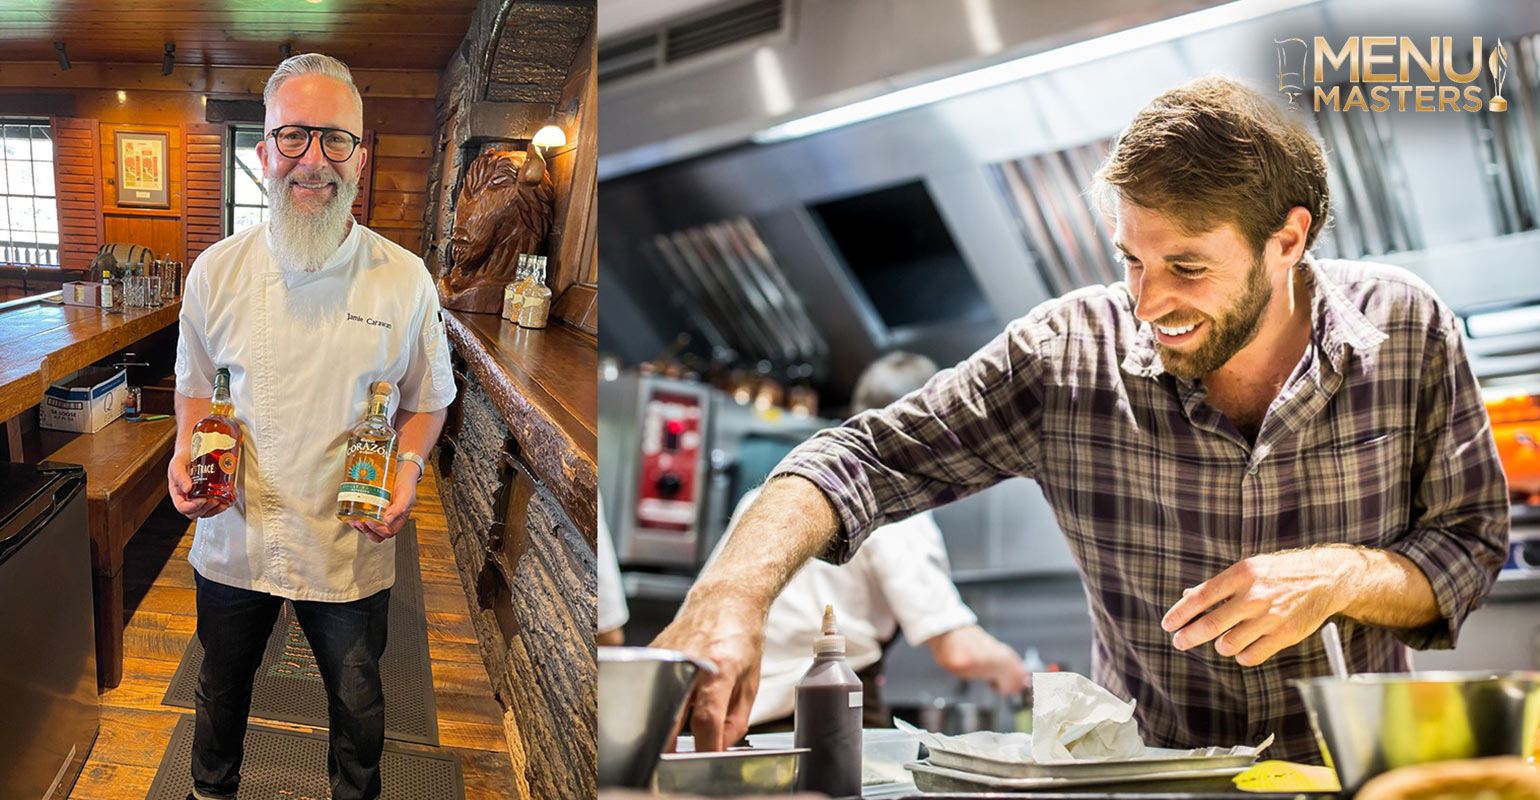 Chefs Jamie Carawan and Mark Rosati Want to Tell You a Story